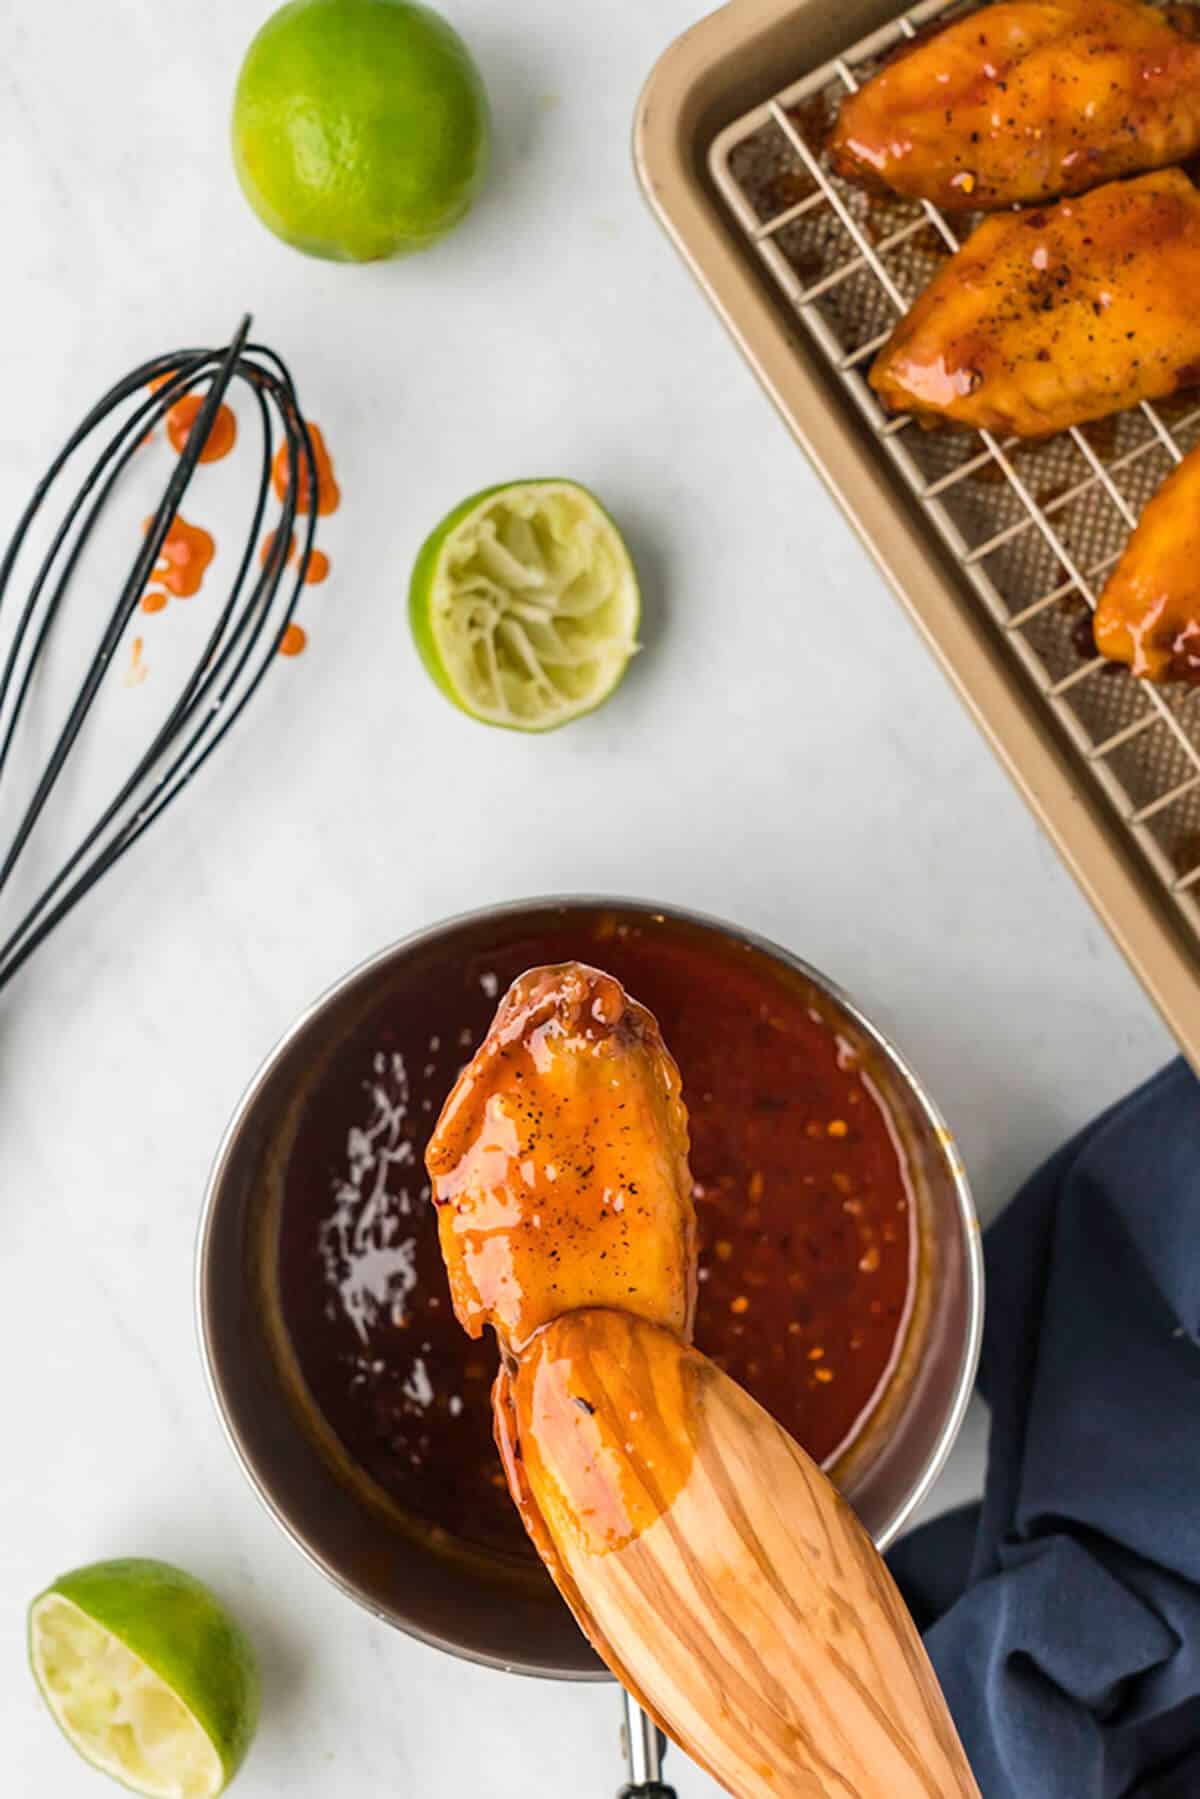 Dipping wings into sauce.